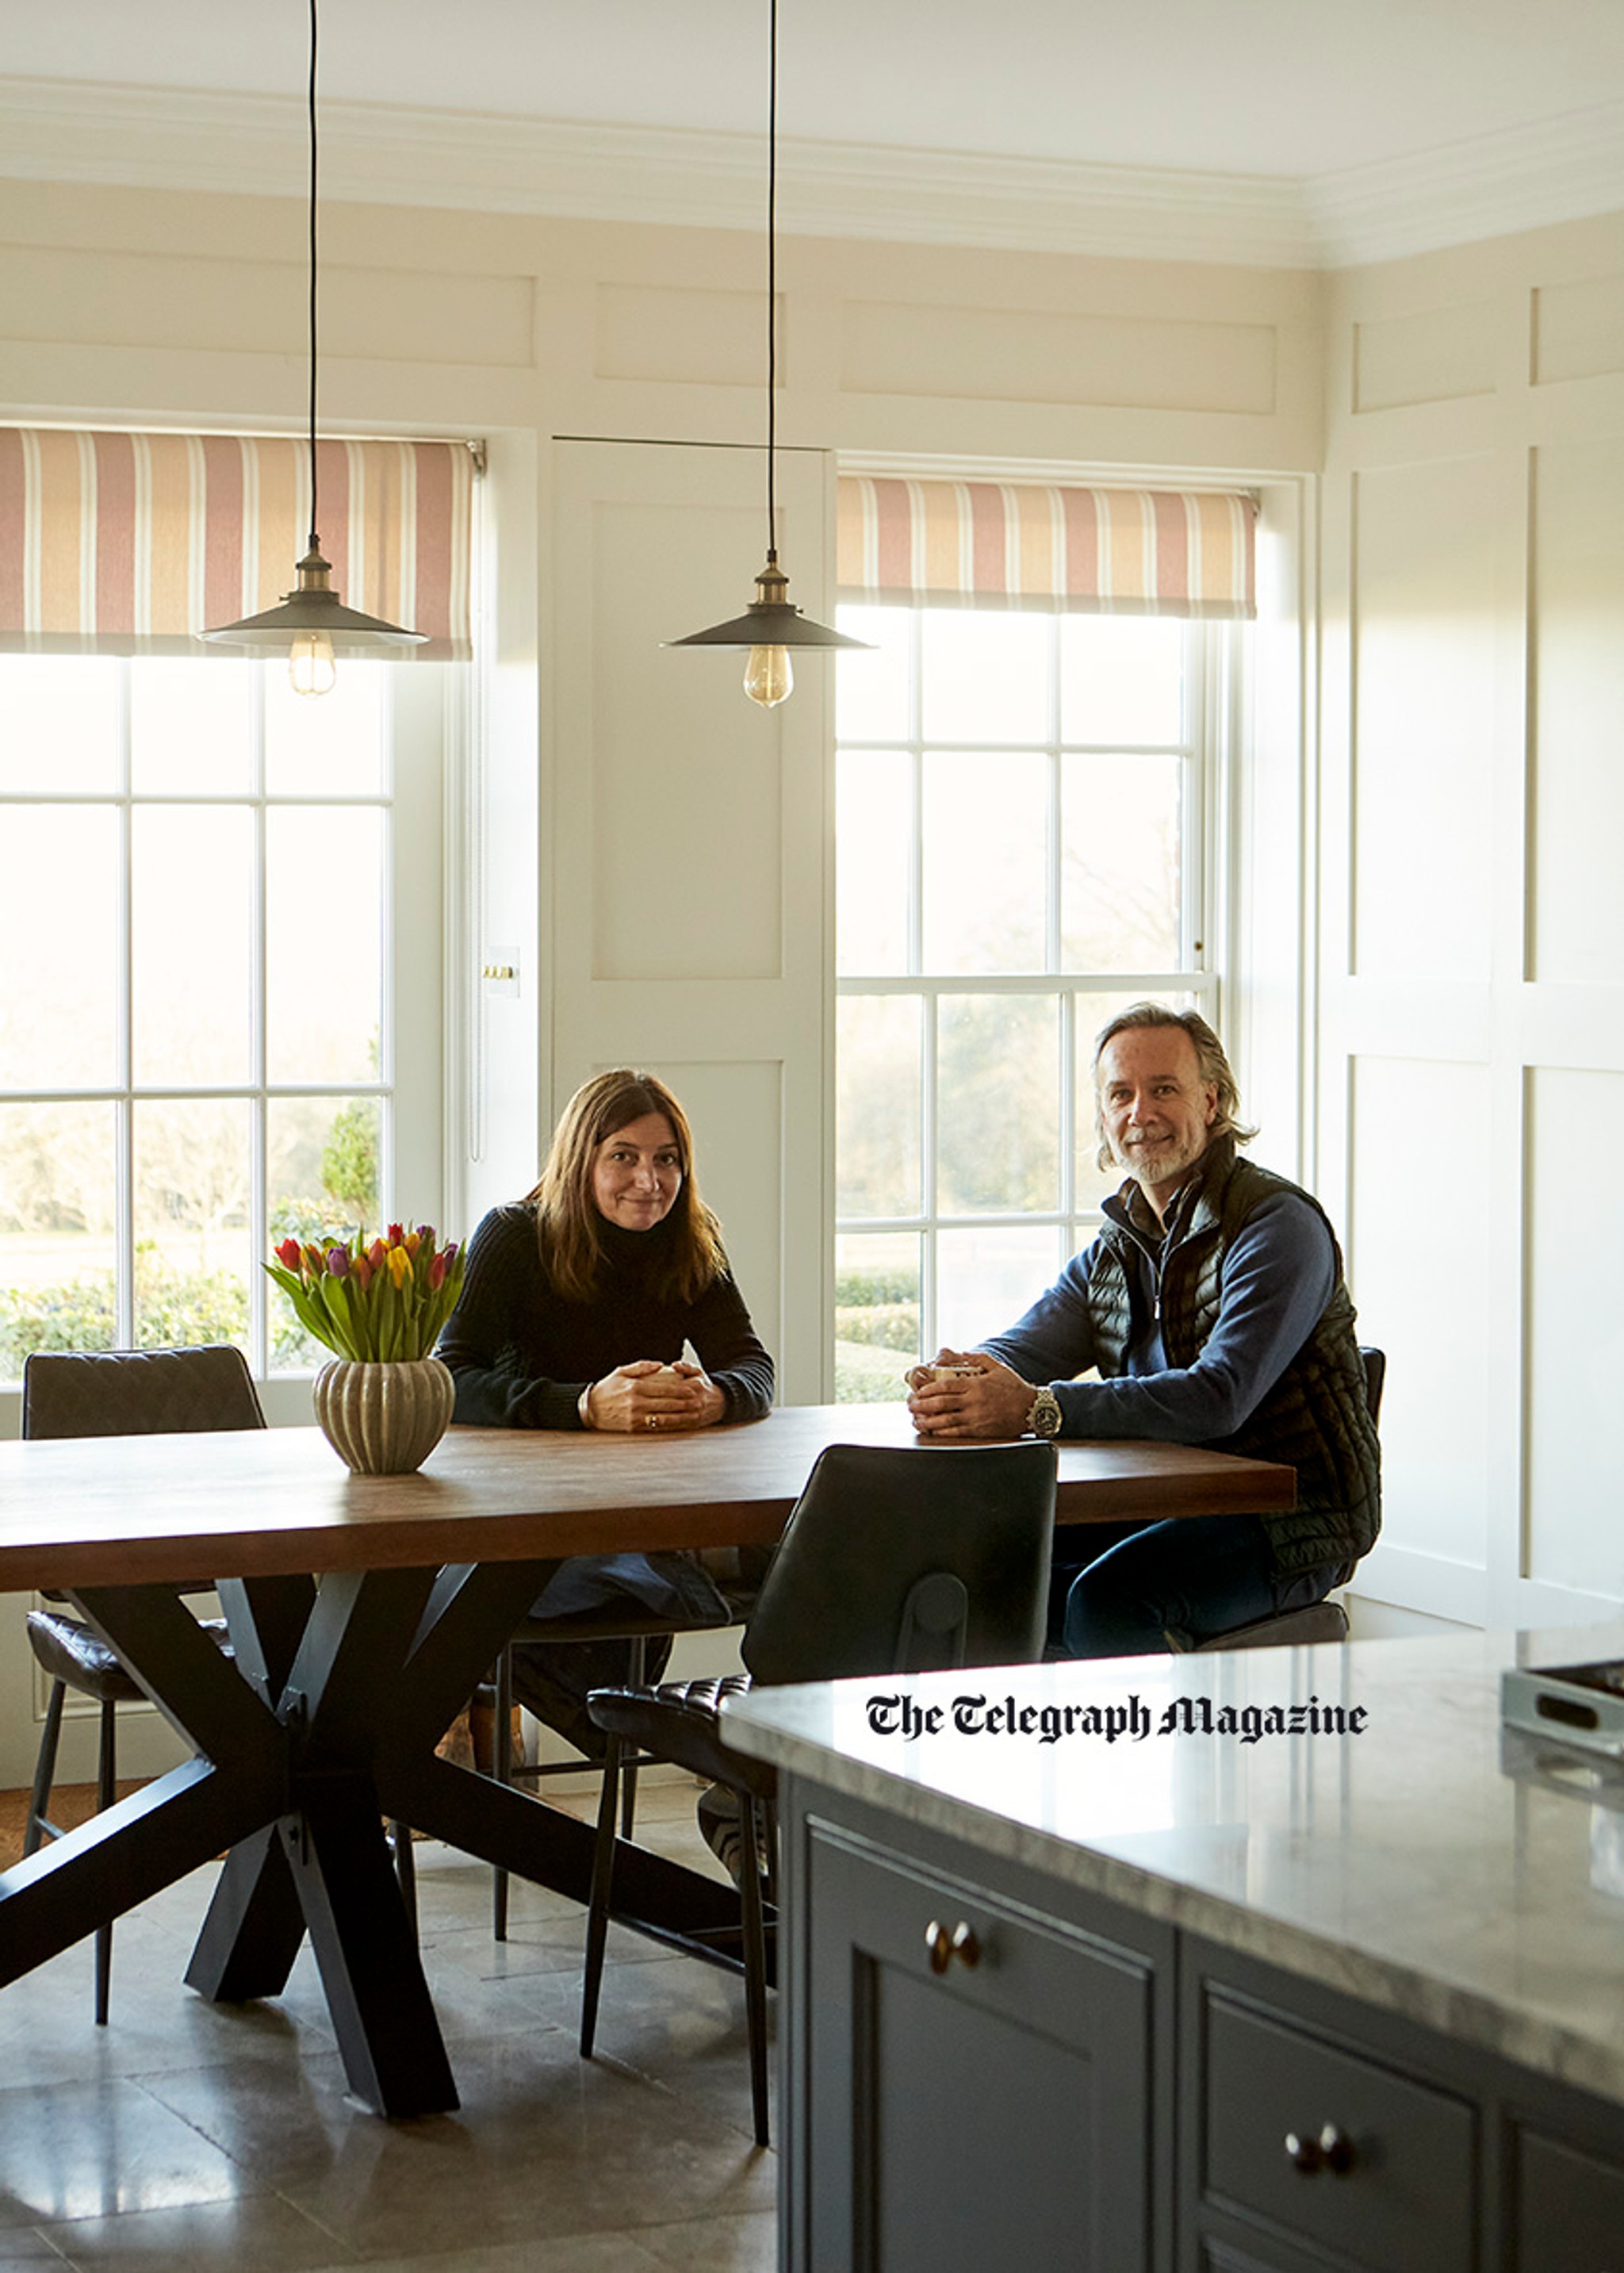 Marcus Wareing and his wife Jane at their kitchen table